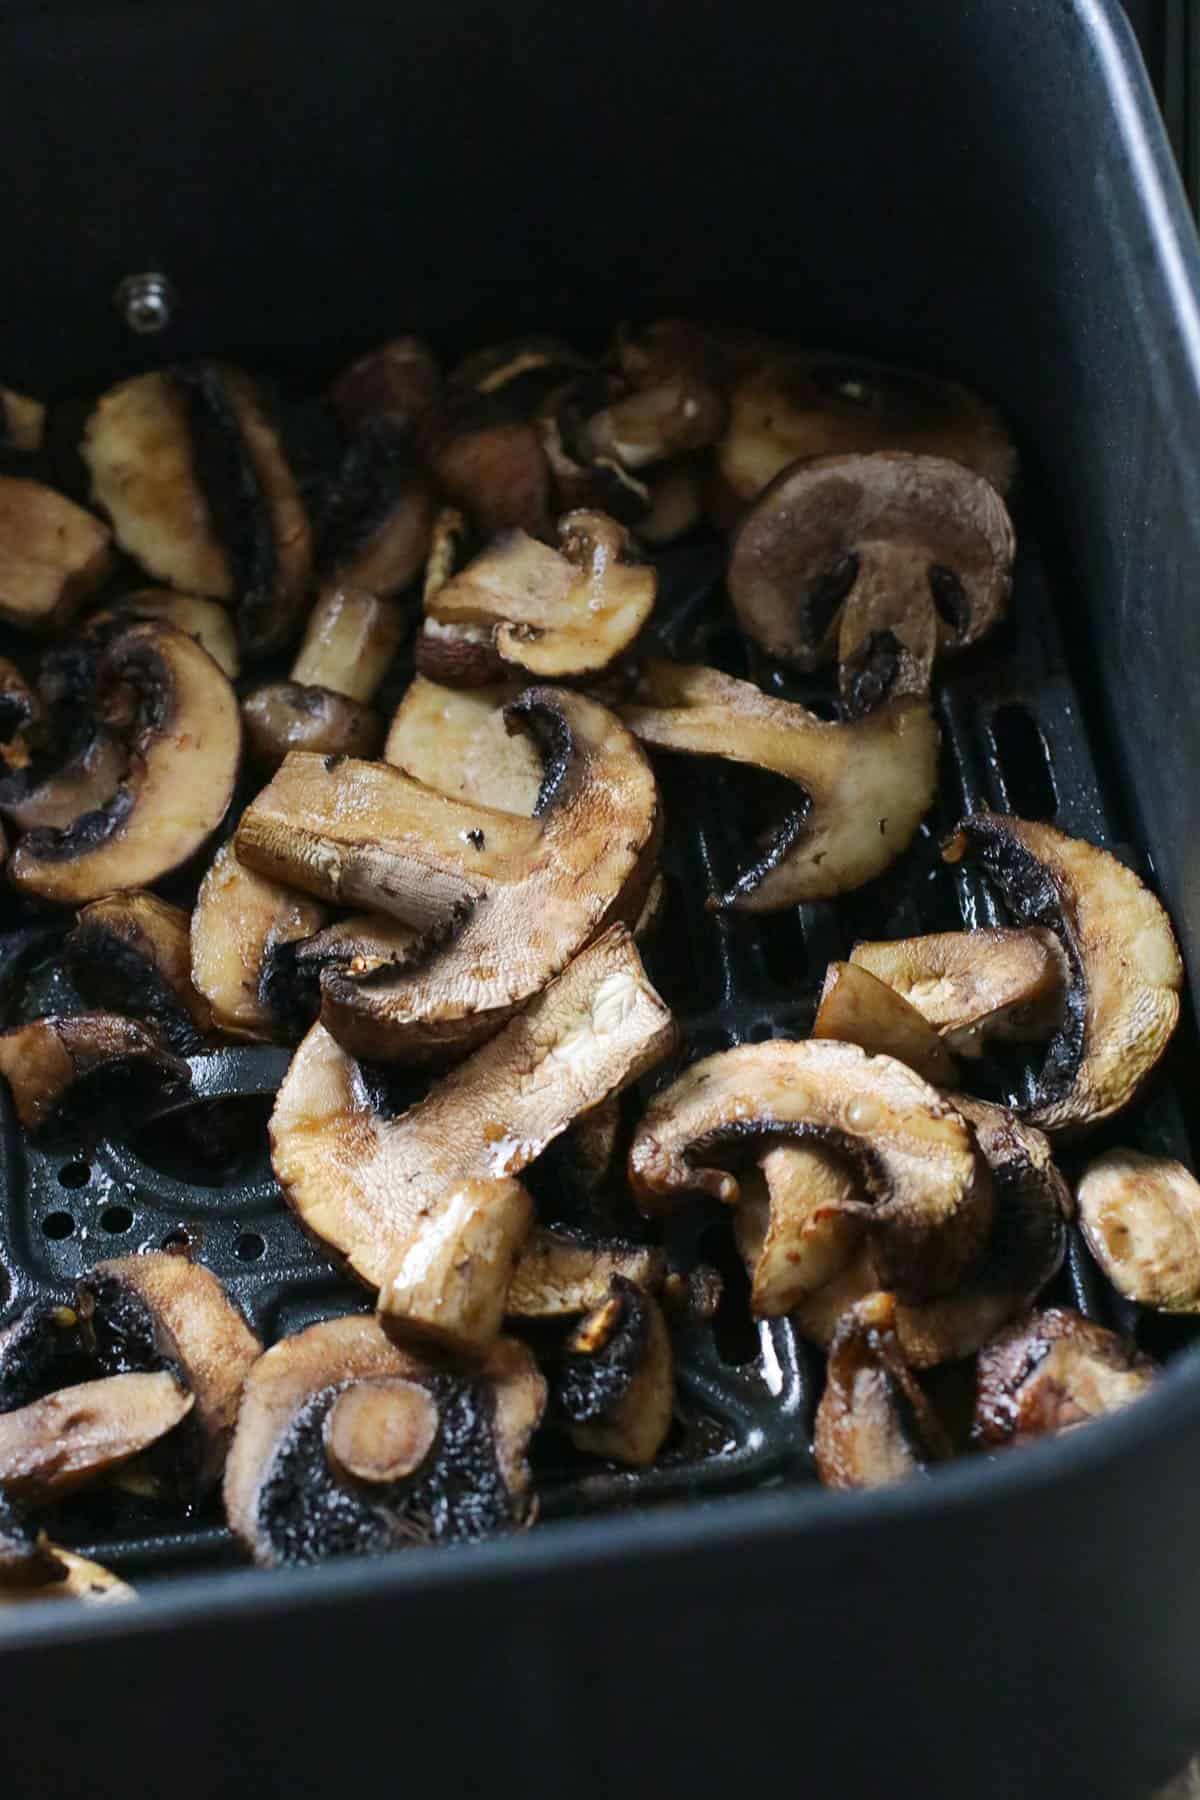 Cooked mushrooms on an air fryer basket.